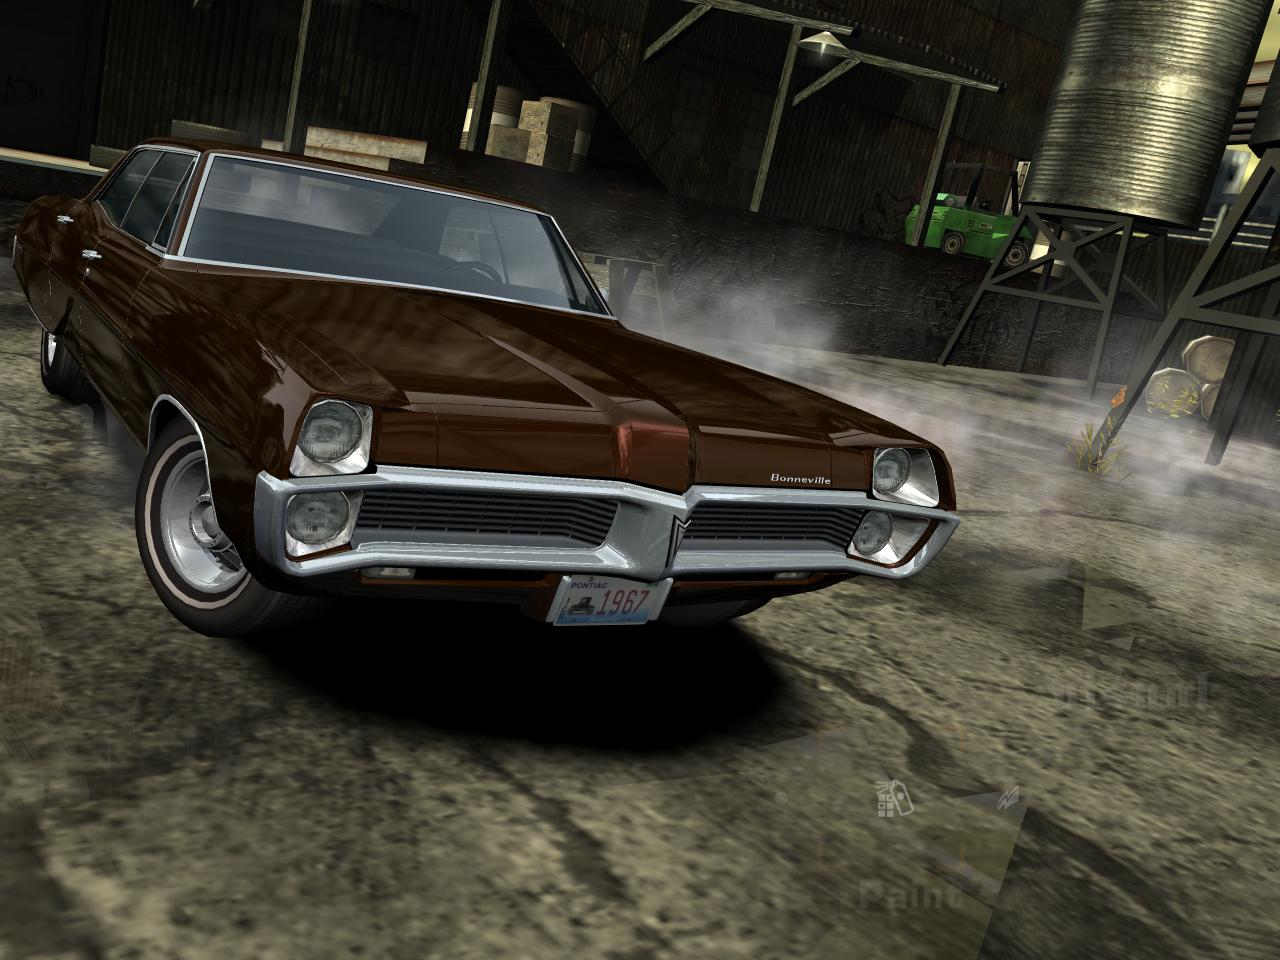 Need For Speed Most Wanted Pontiac Bonneville (1967) v.2.0